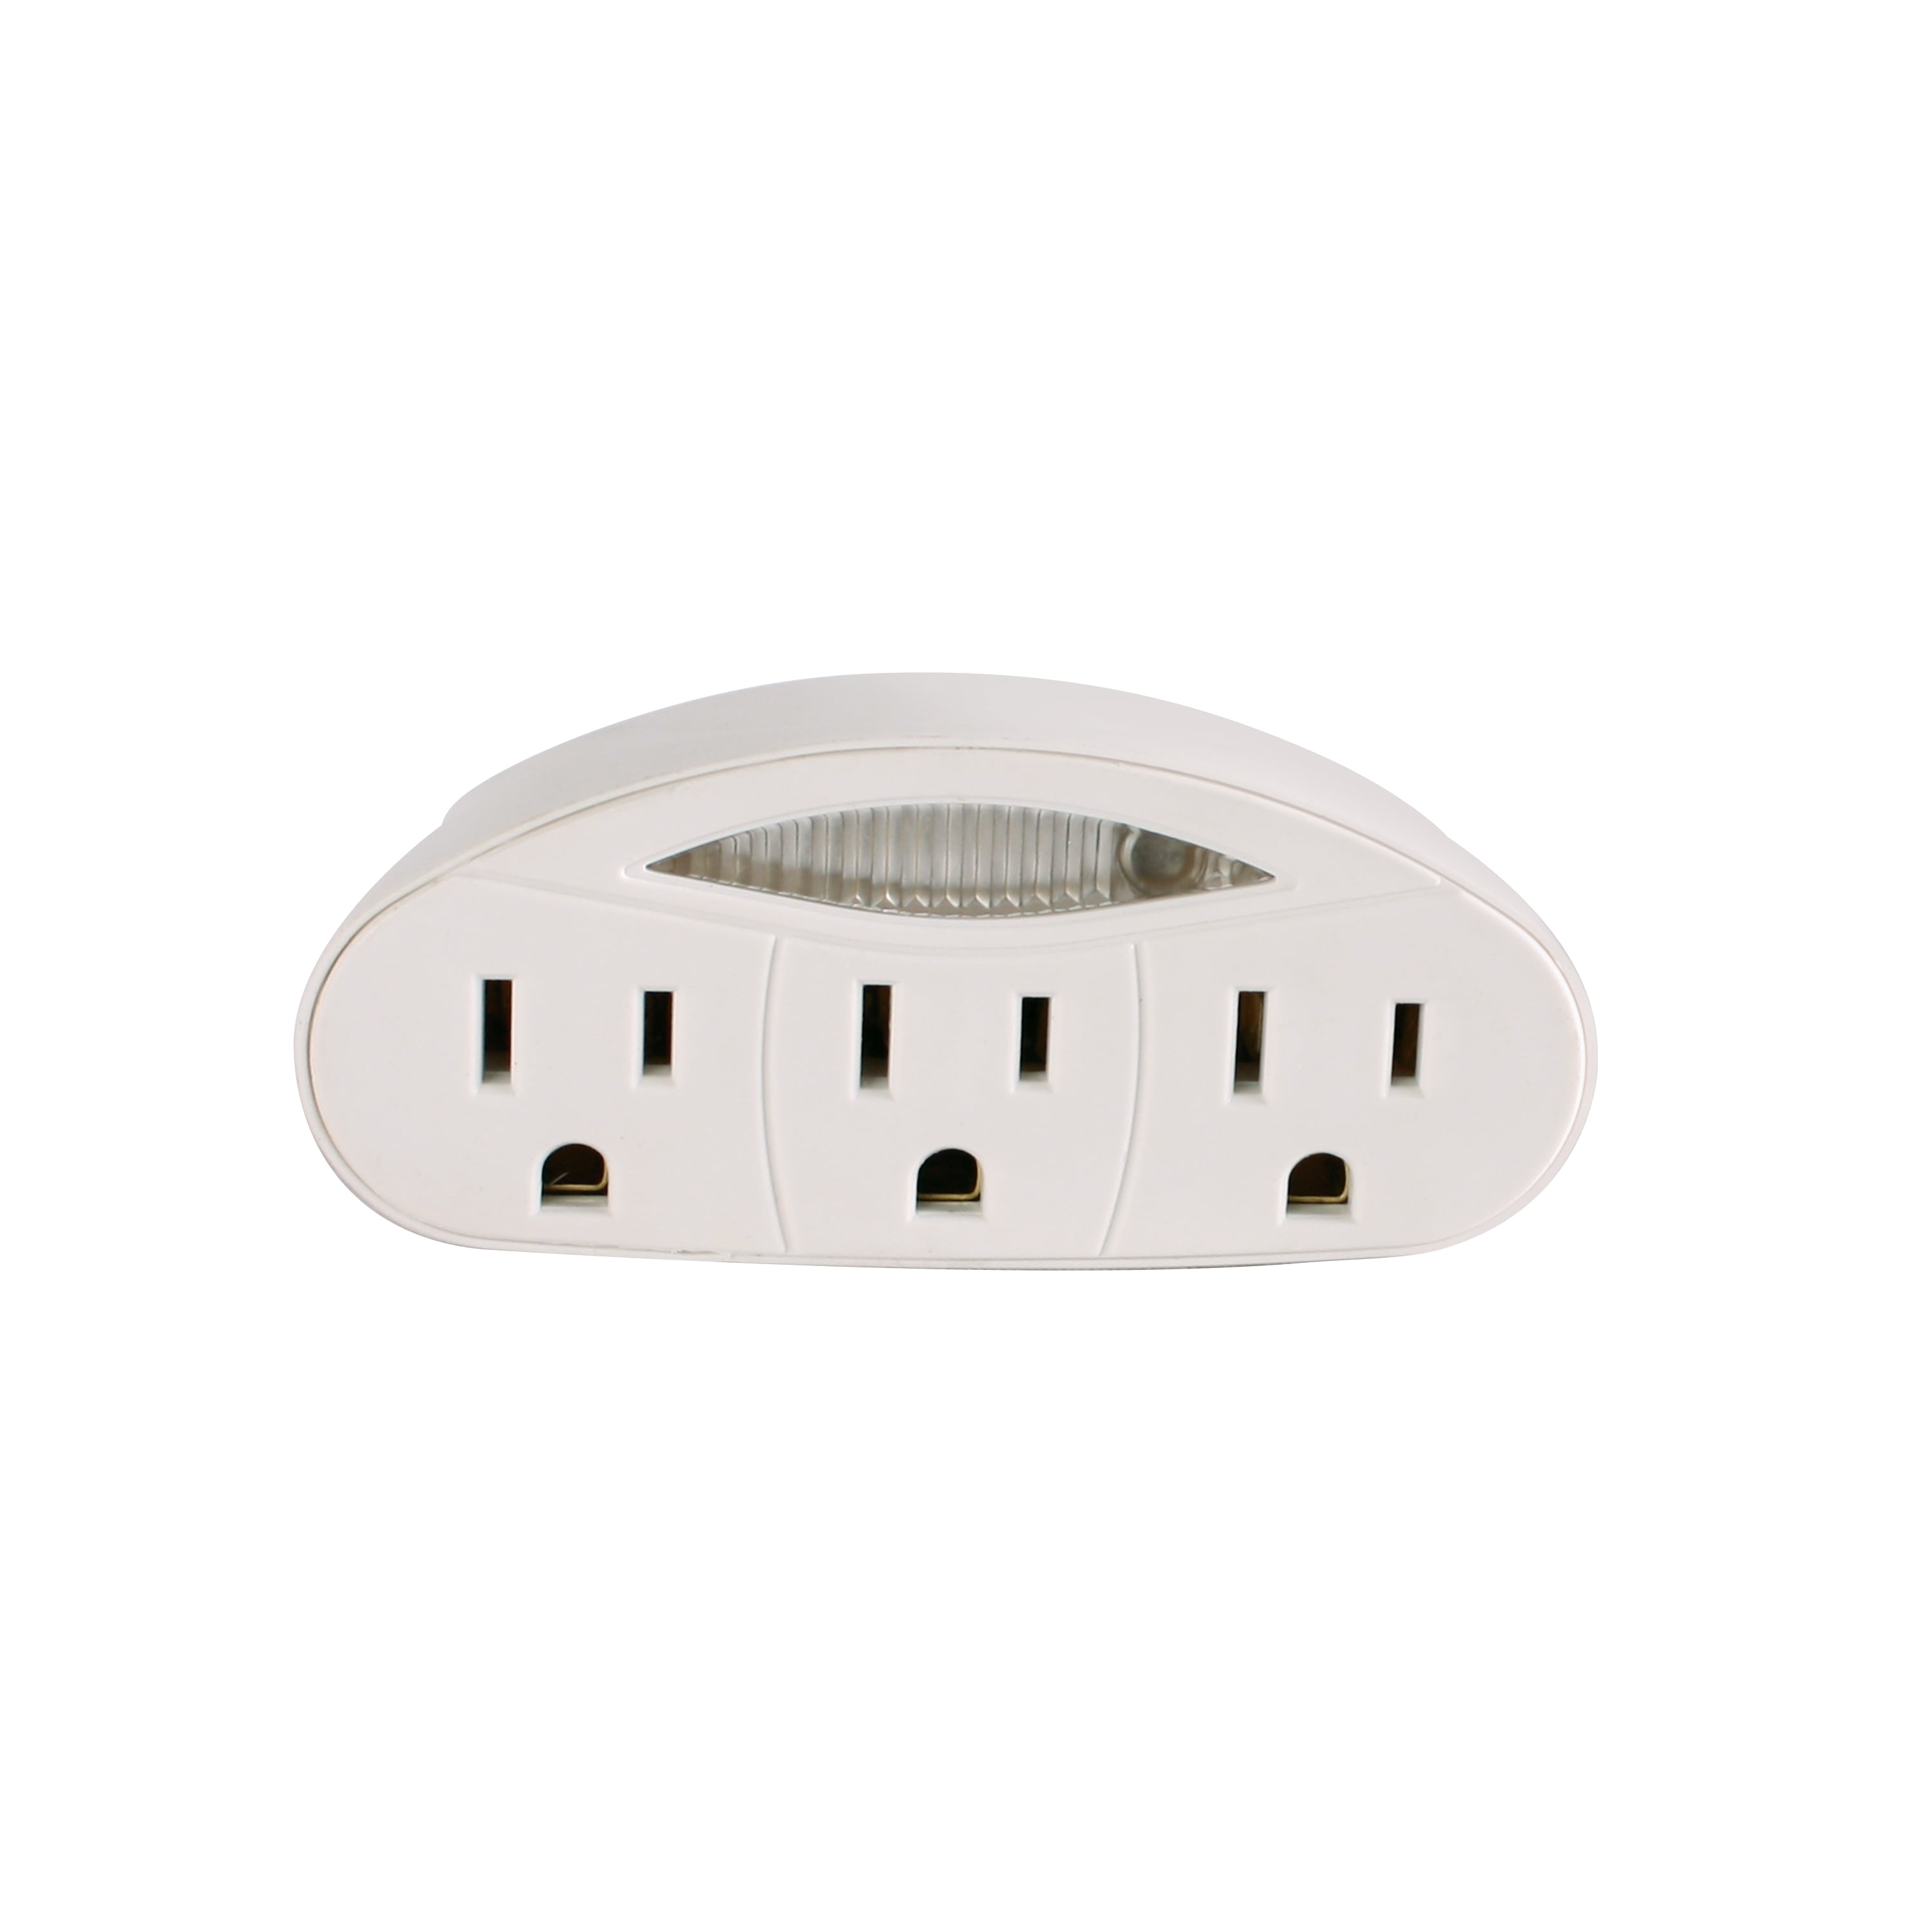 POWER ZONE OR801105 Tap 6 Outlet with Nightlight 